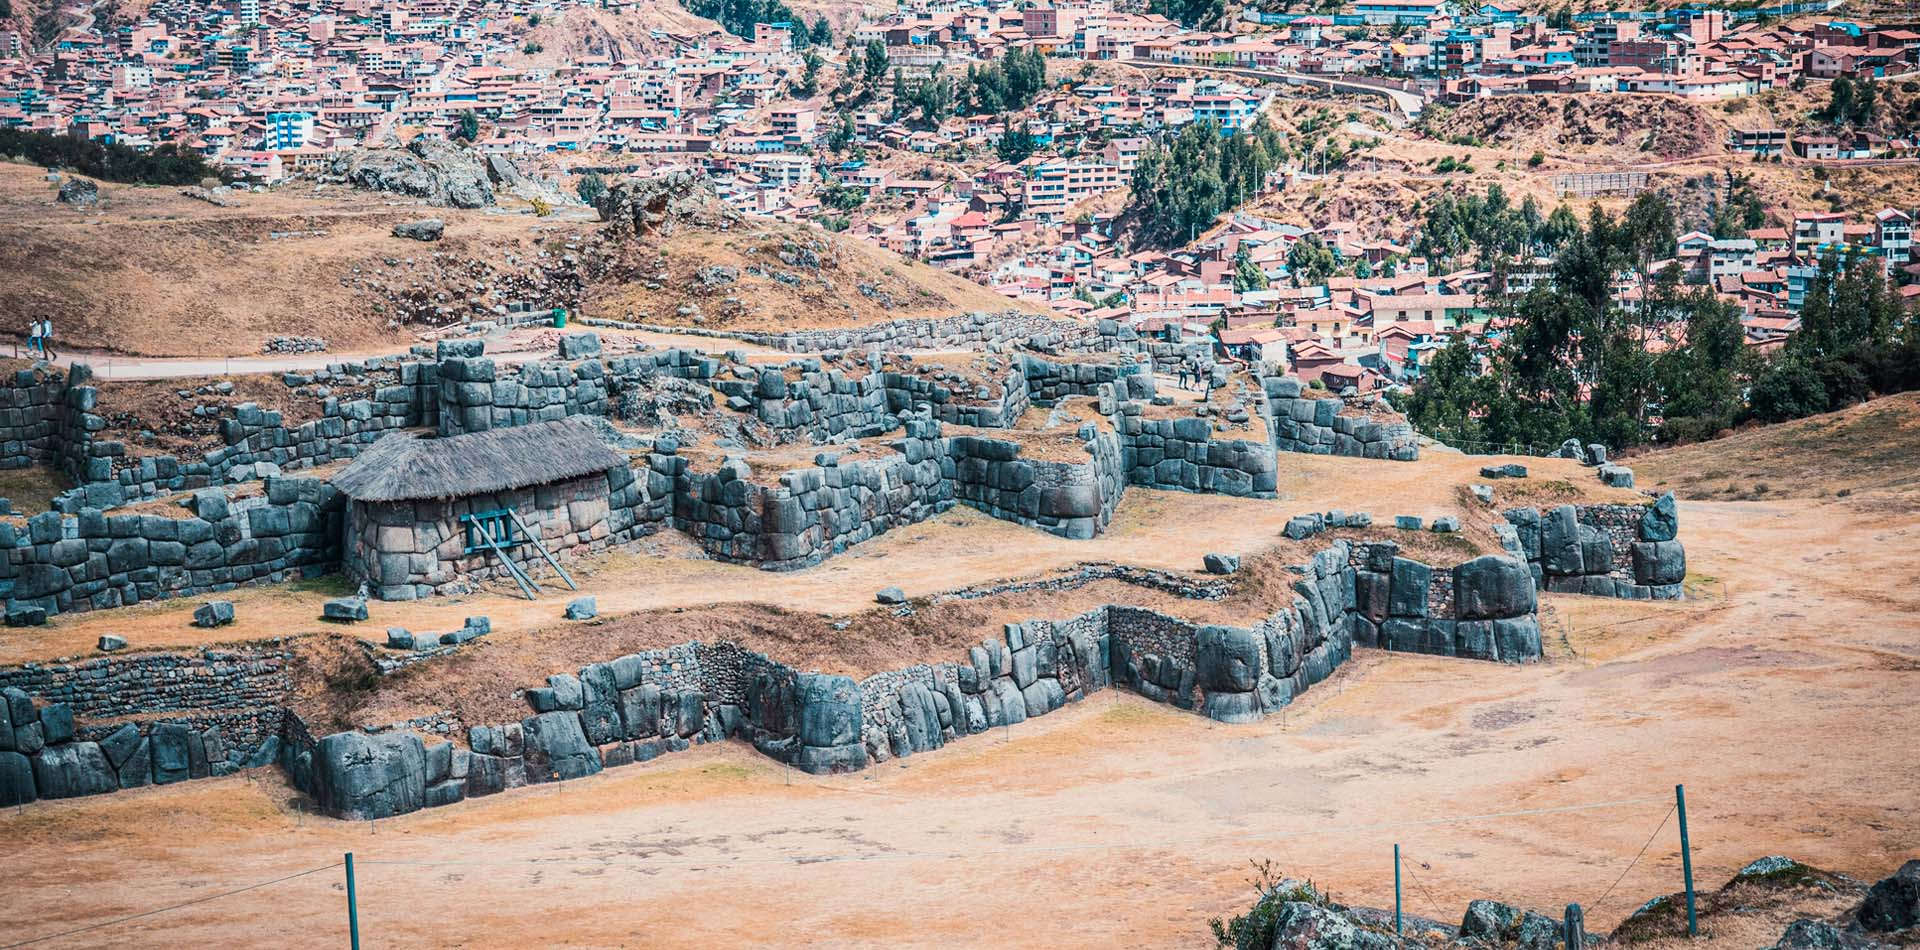 Cusco City Tour: The archeological sites of Cusco Sacsayhuaman